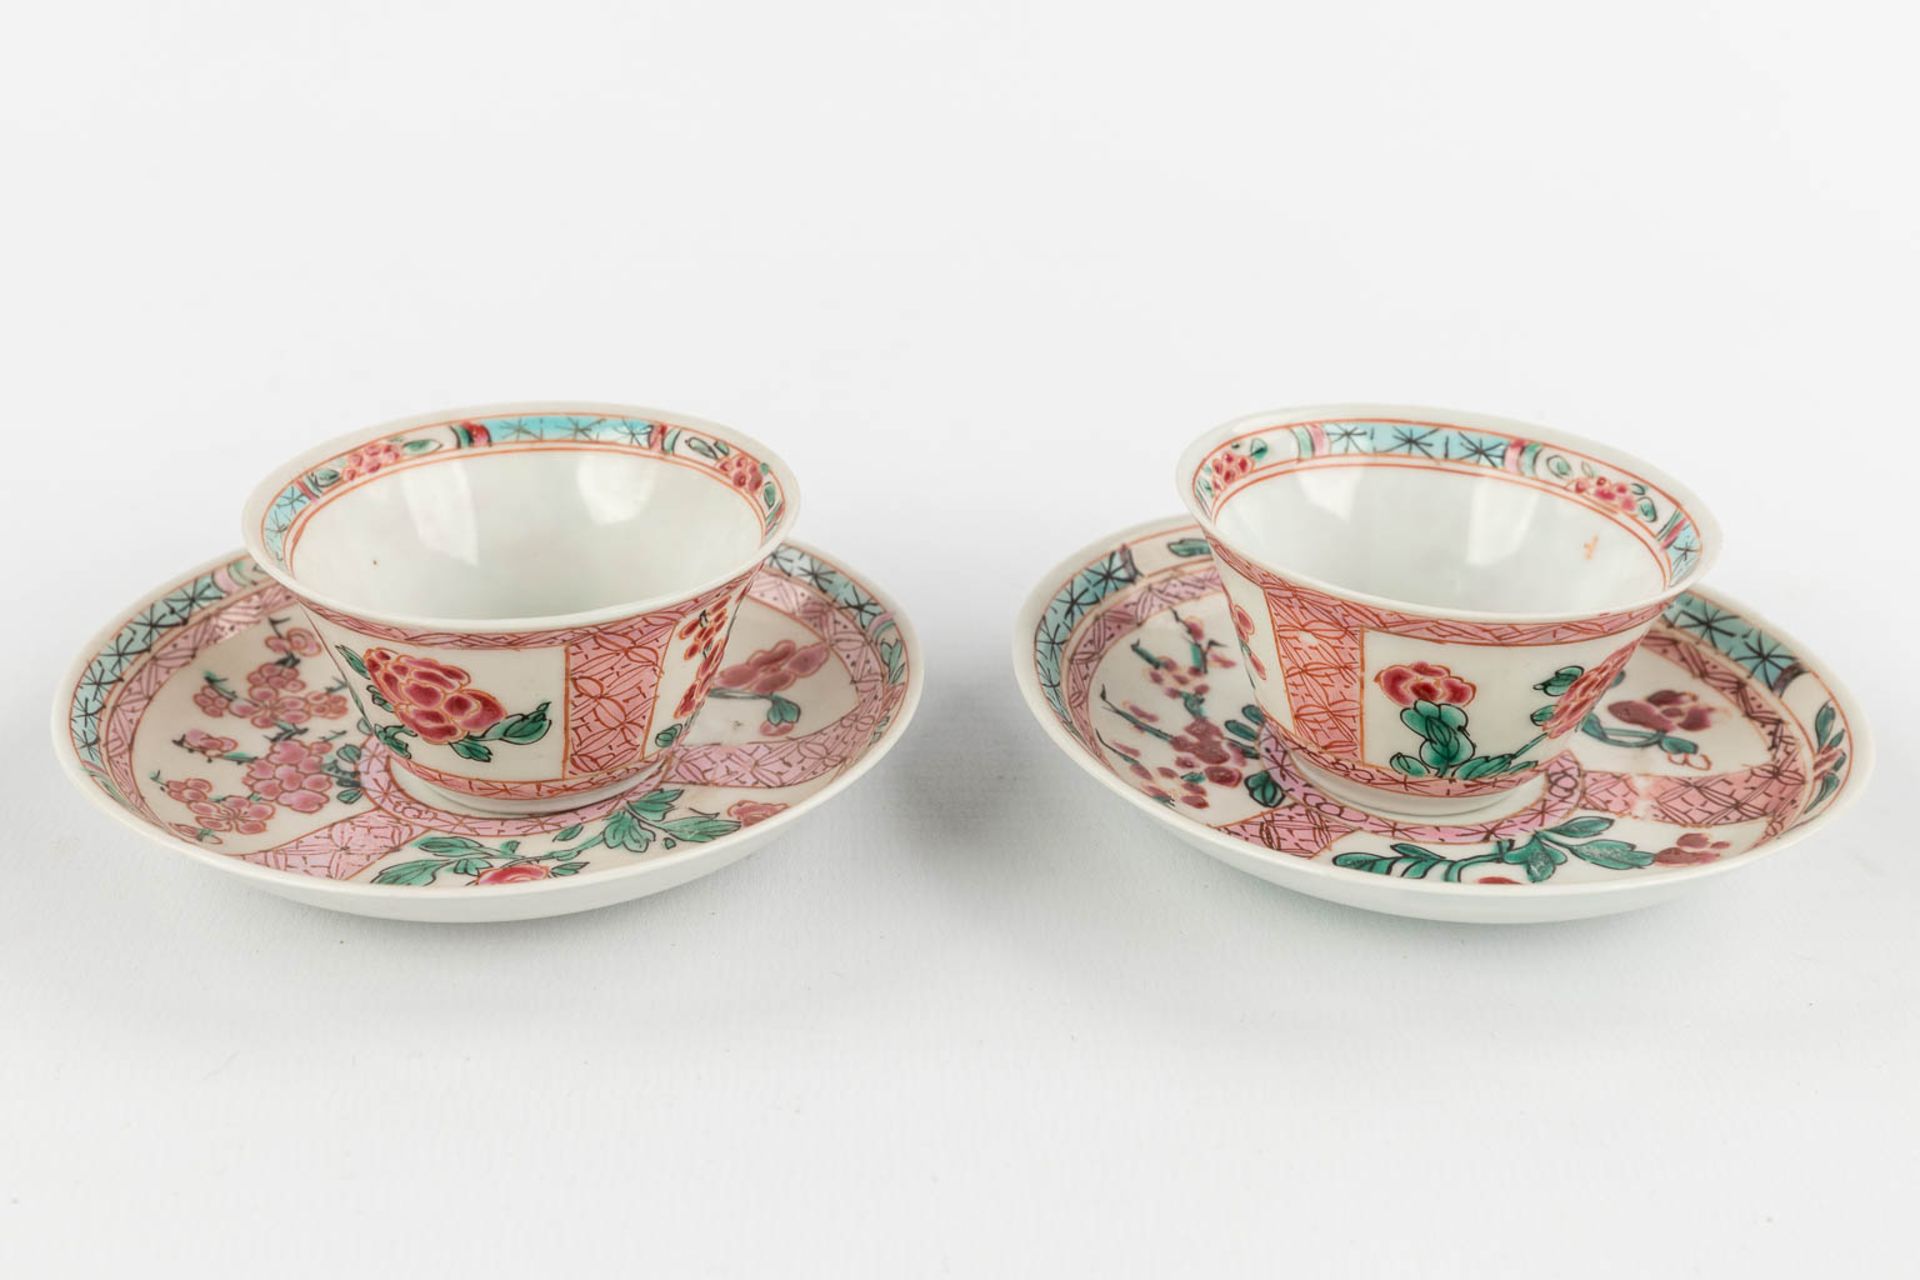 A collection of Chinese and Japanese porcelain, Imari, Blue-white, Famille Rose. 19th/20th C. (D:21 - Image 8 of 19